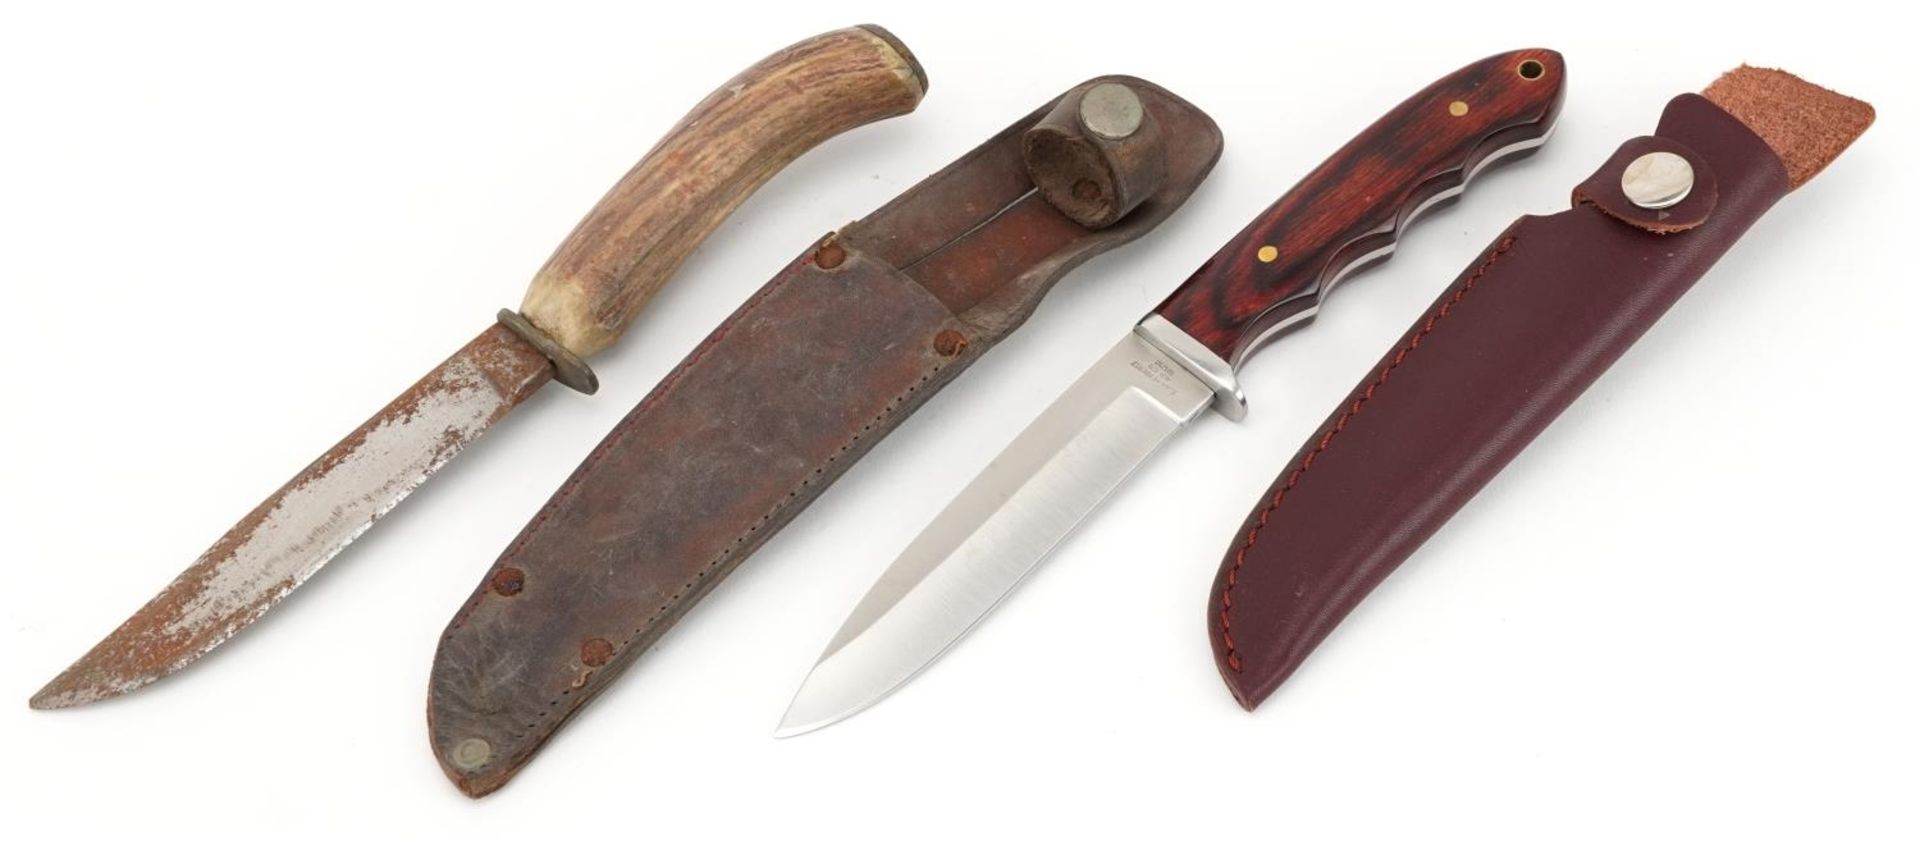 Horn handled hunting knife housed in a leather sheath and a C. Jul Herbertz hunting knife numbered